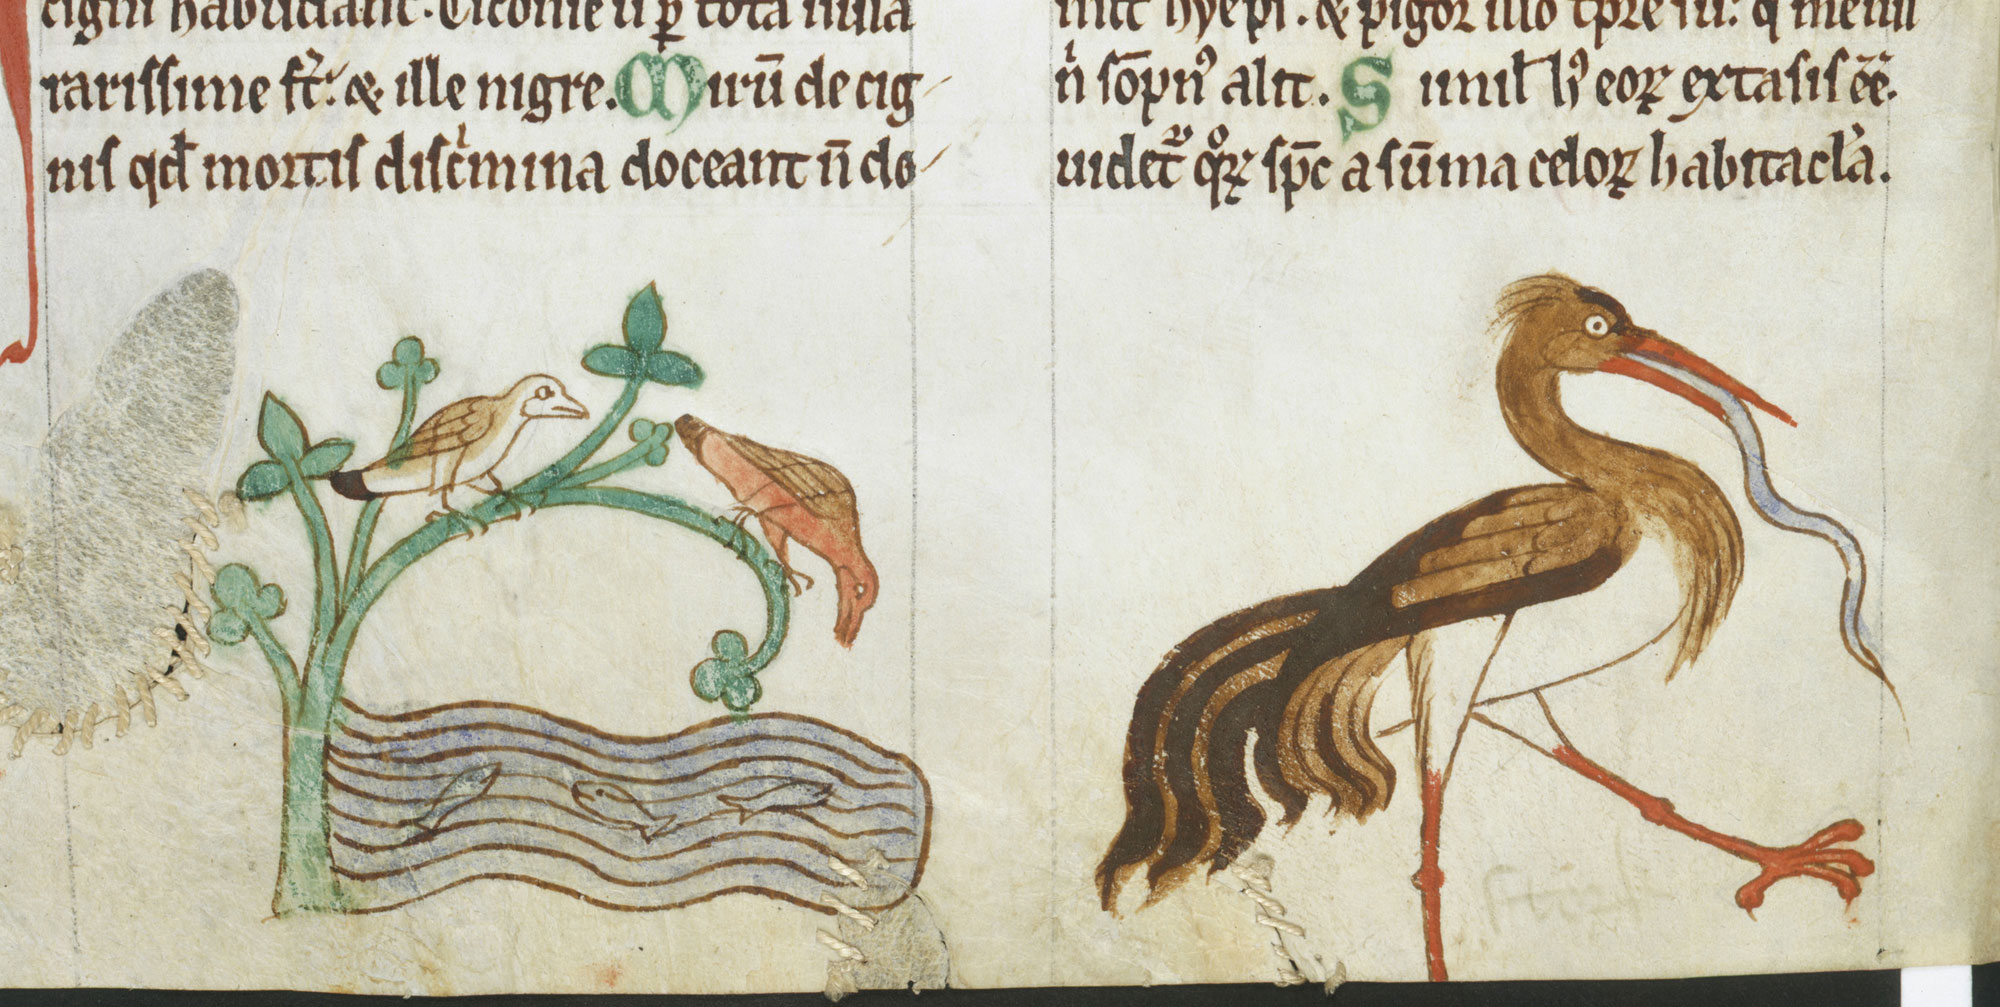 Portion of a page from Topographia Hibernica, a book from around 1220 written by Gerald of Wales. The left side fo the page shows two kingfishers perched in a tree over a river with fish. The kingfishers are not depicted very accurately.